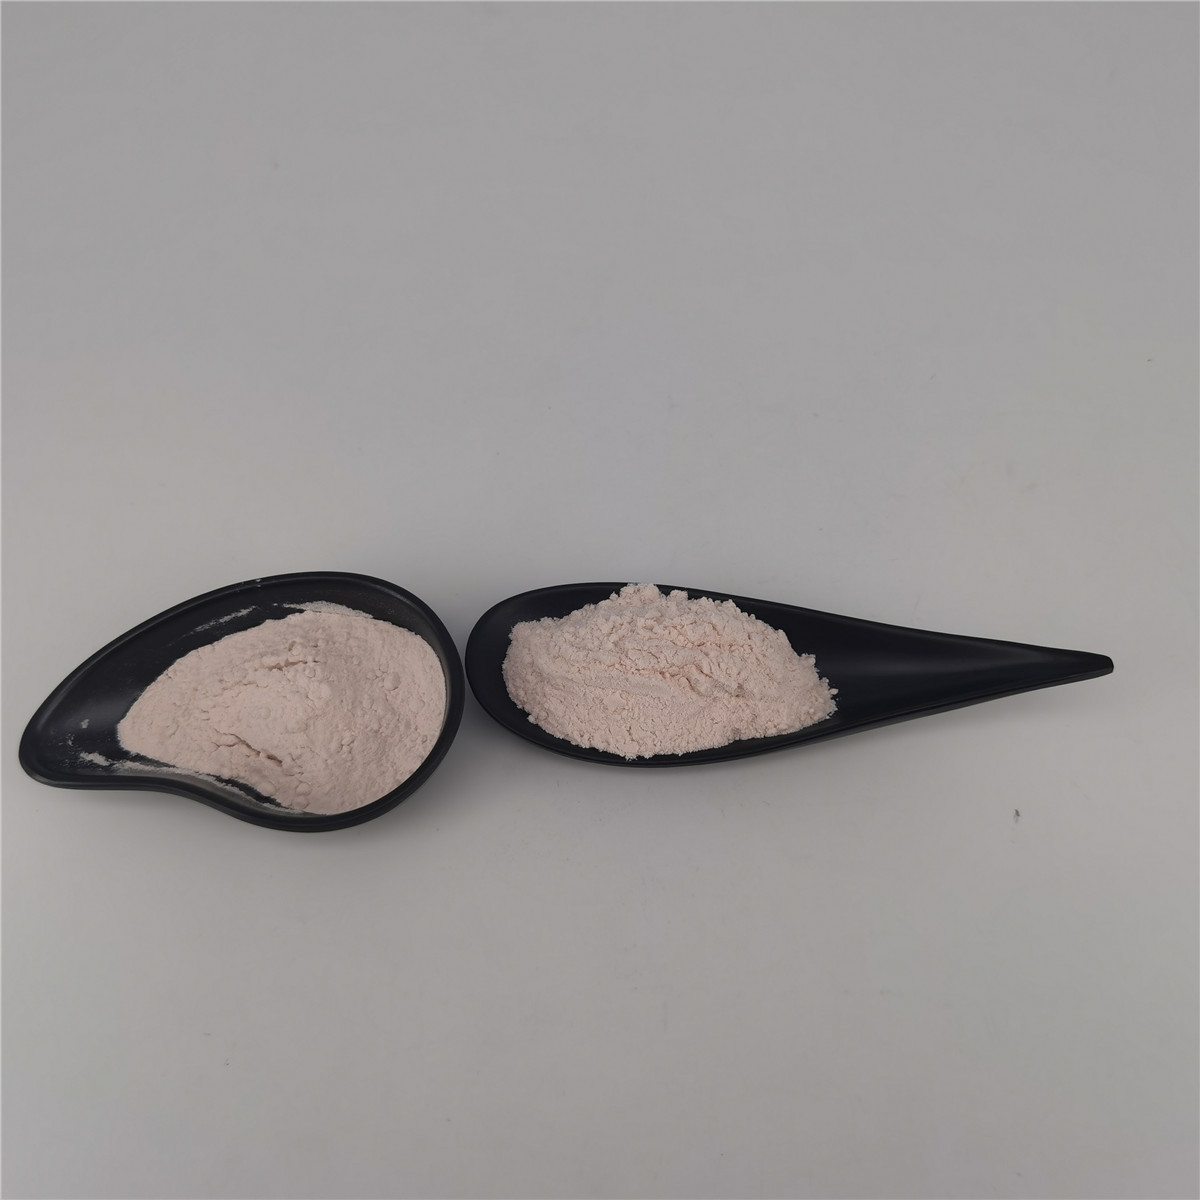  Cosmetic Grade Pure SOD2 Mn/Fe Superoxide Dismutase Powder CAS 9054-89-1 Manufactures